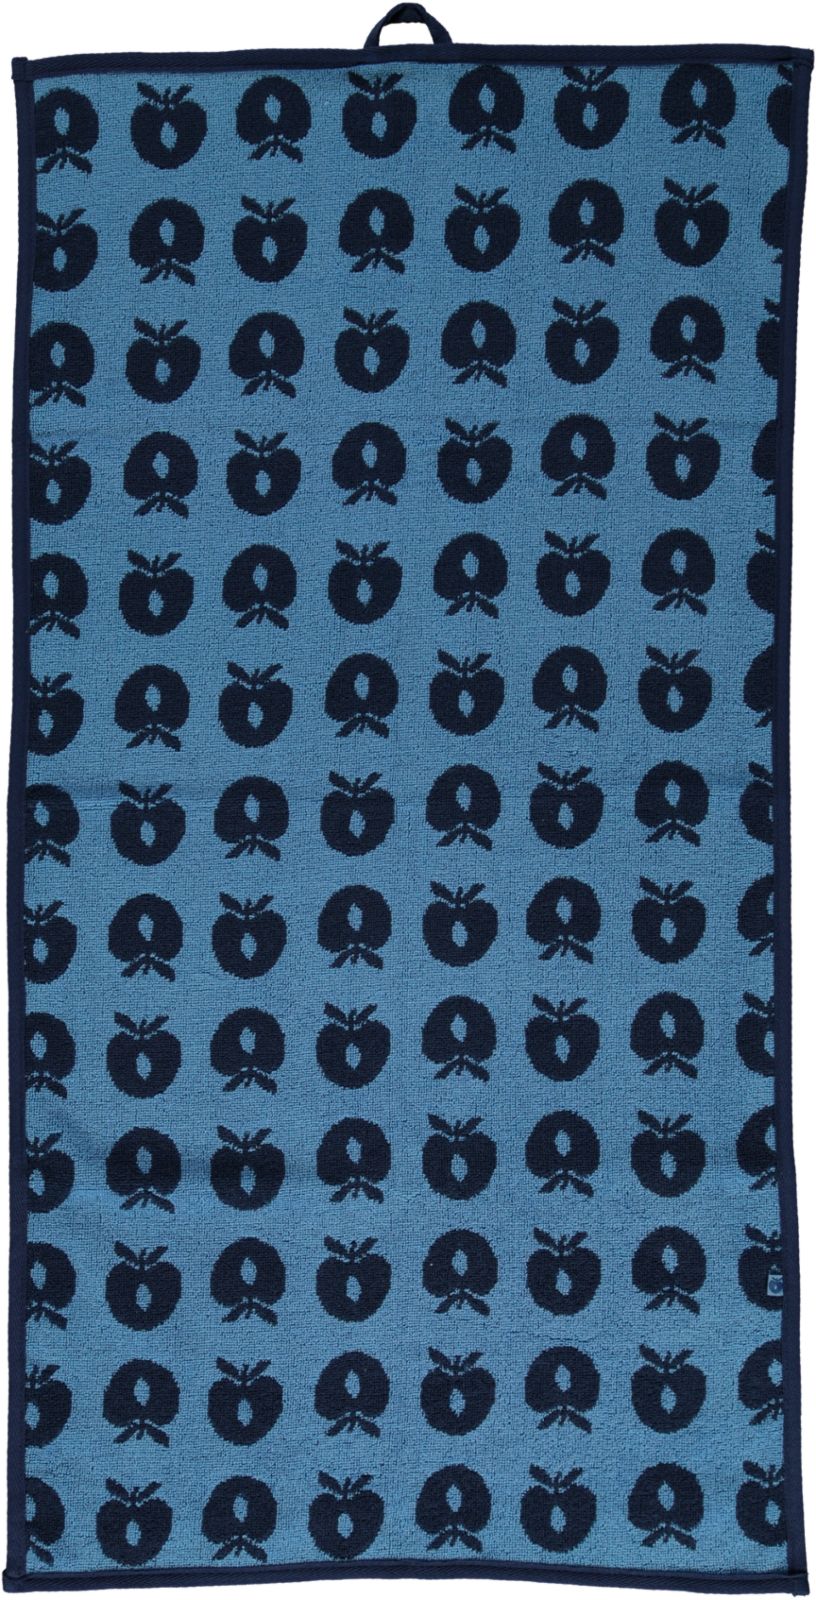 Towel 50x100 with Apples